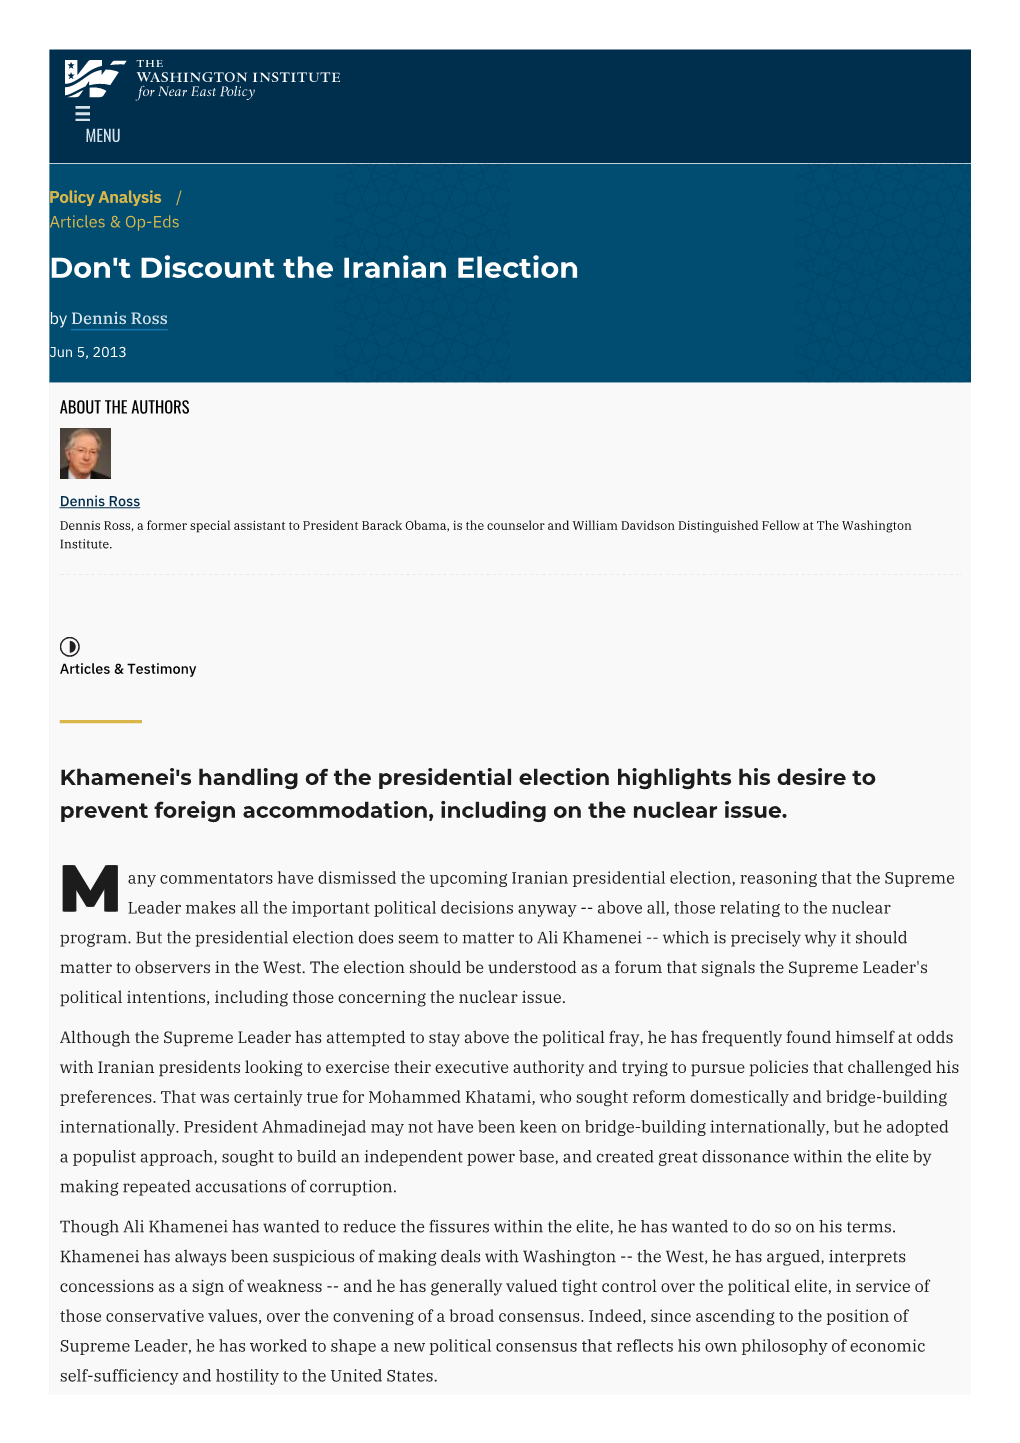 Don't Discount the Iranian Election | the Washington Institute